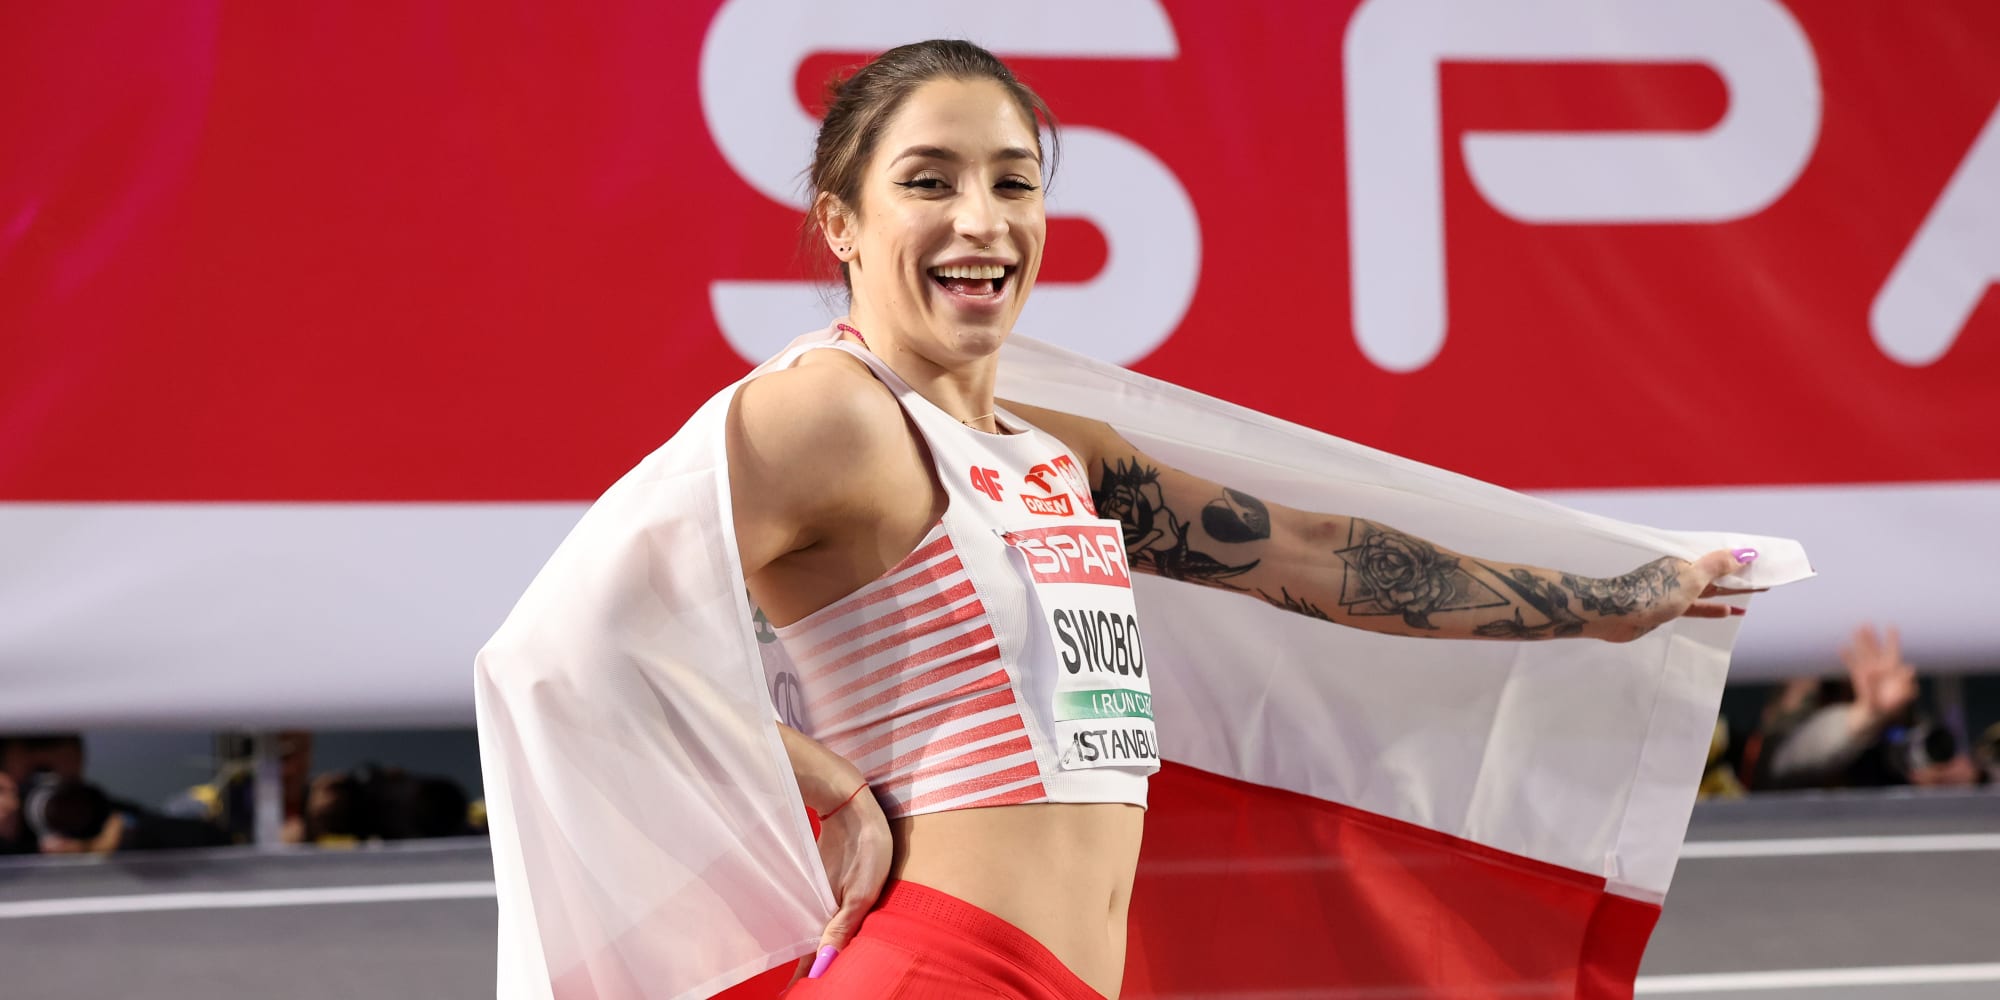 Swoboda wins in Lodz with a world-leading 60m sprint time of 7.04 seconds